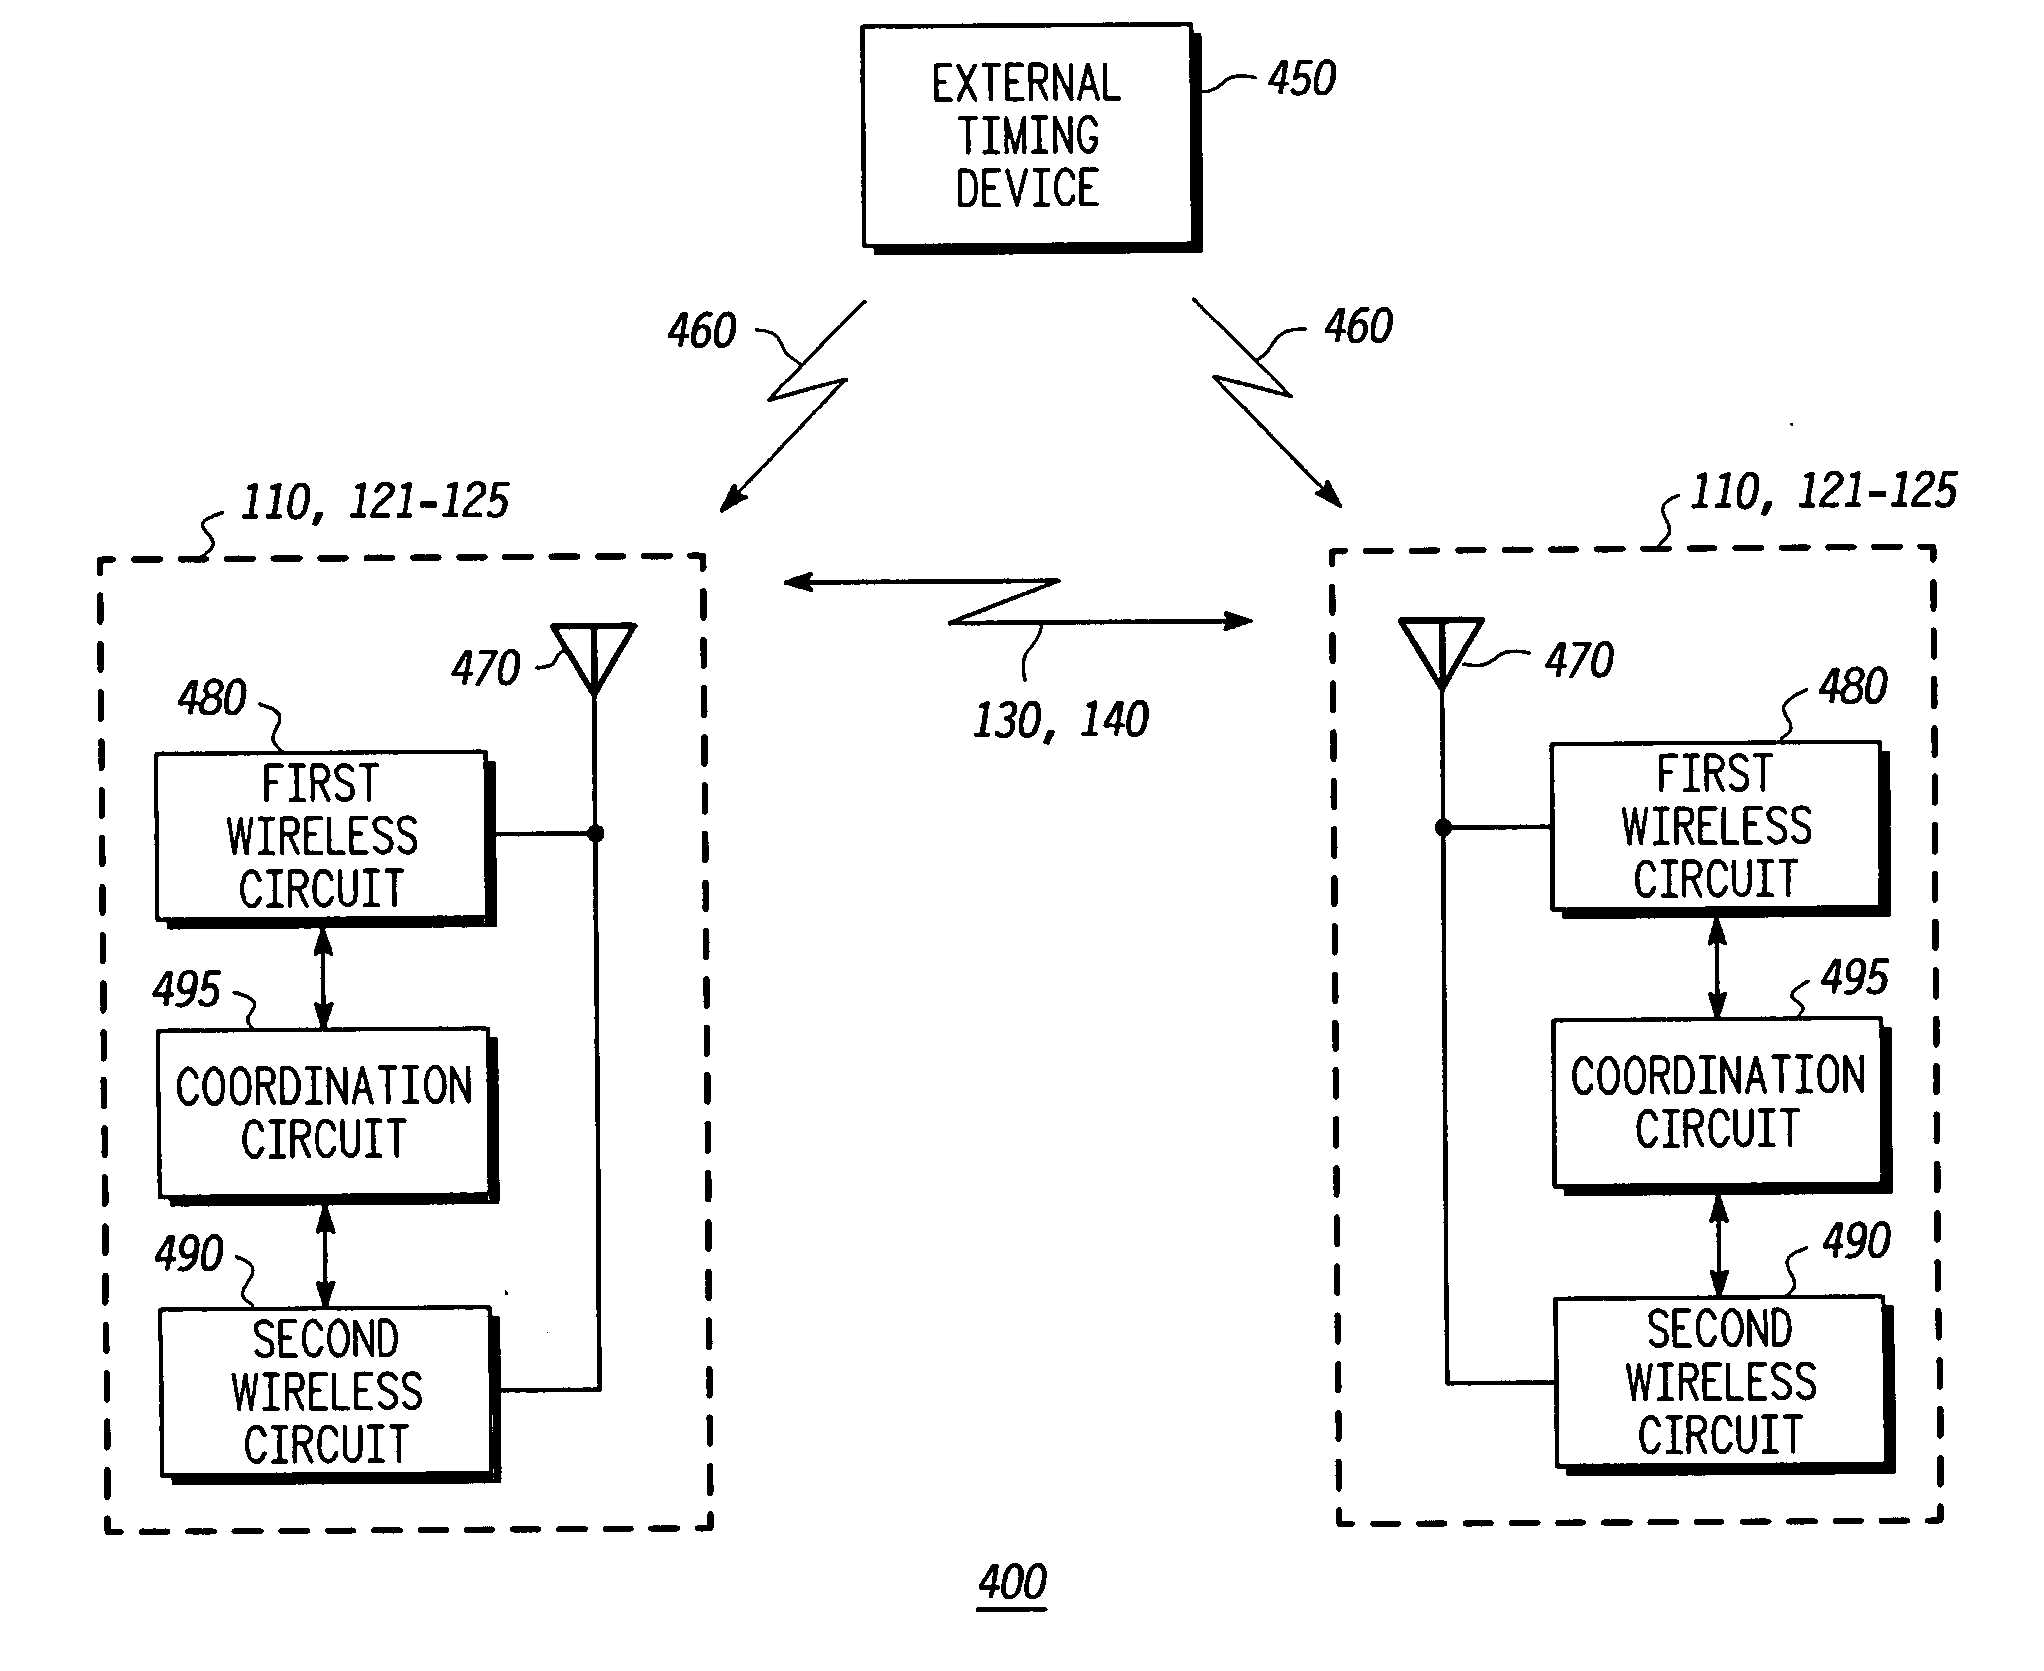 Method of synchronizing a wireless device using an external clock